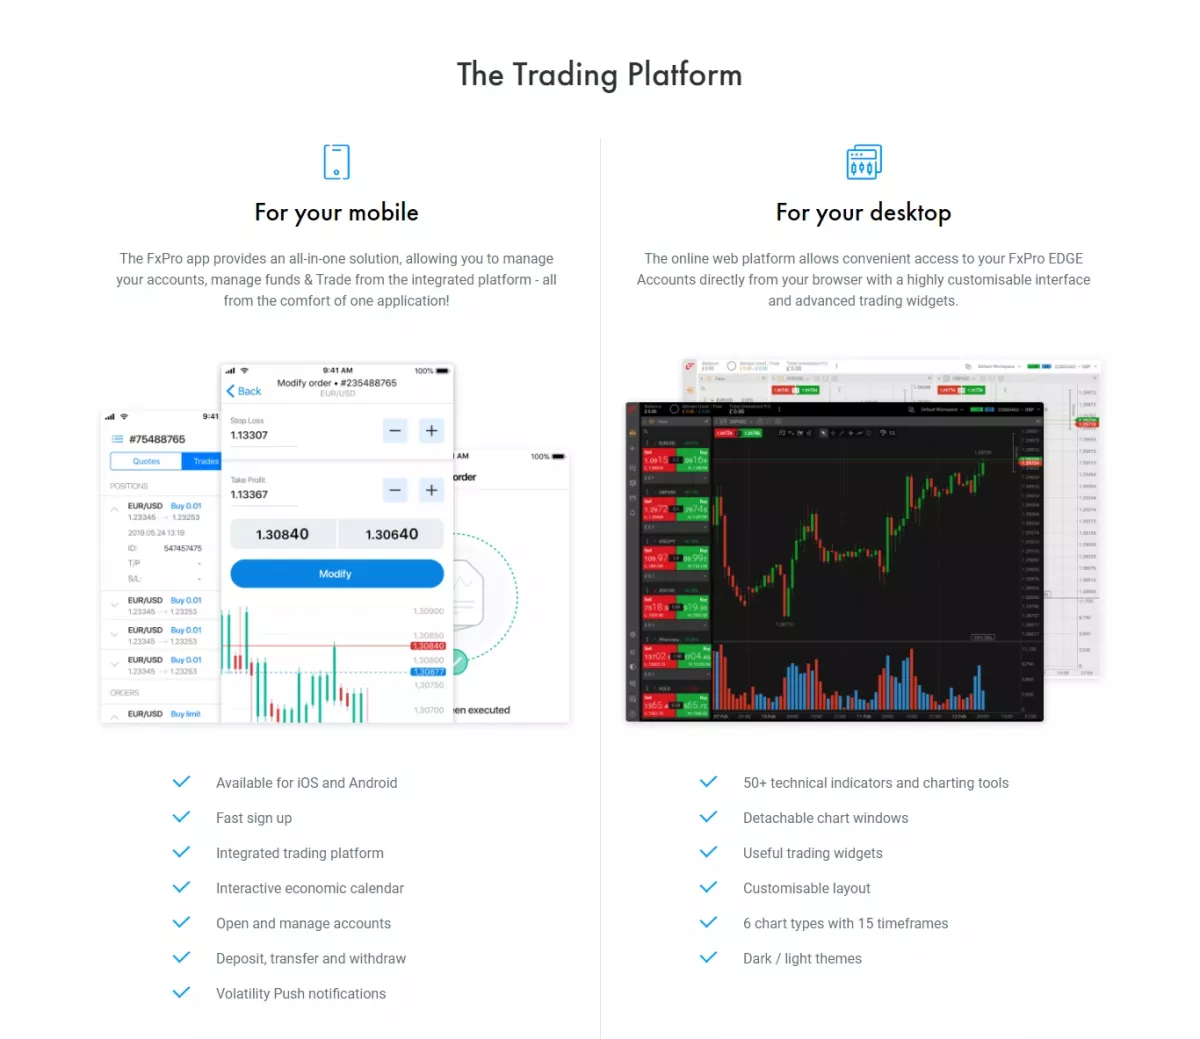 Trading platforms provided by fxpro trading company